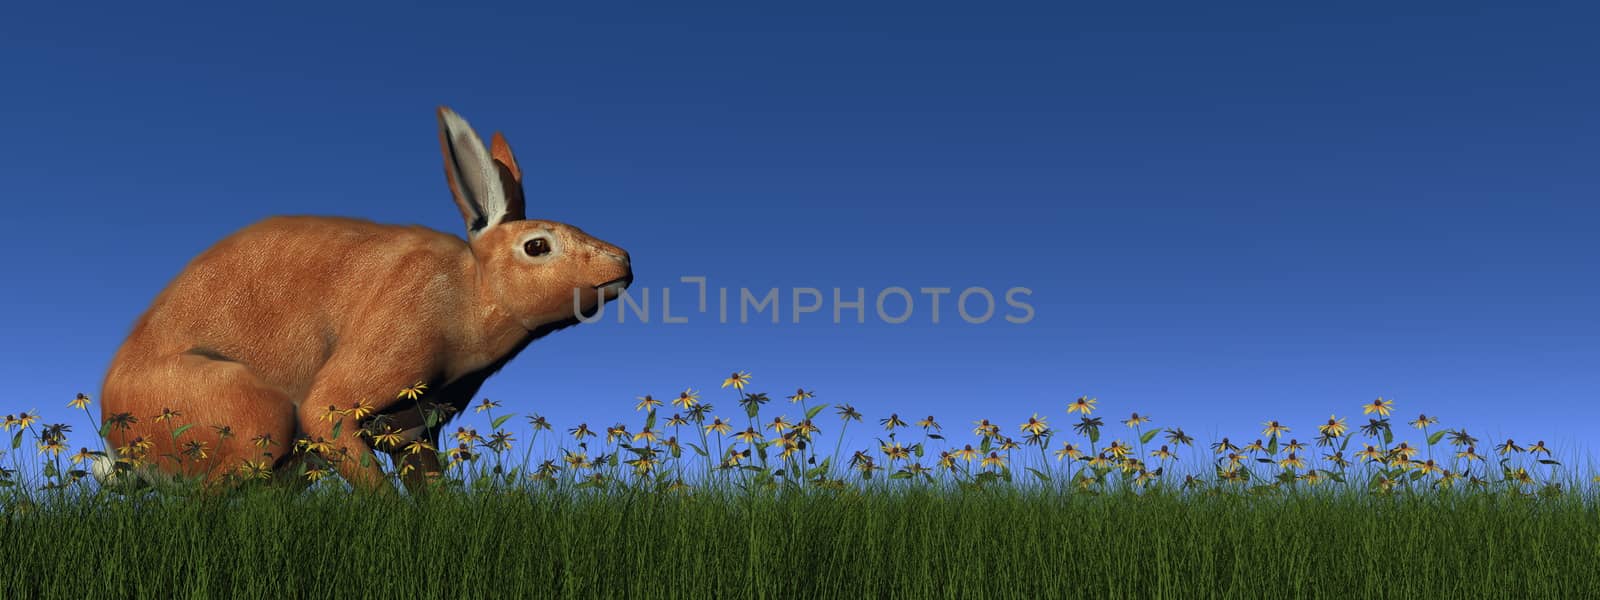 Red rabbit standing in the grass with flowers by blue day - 3D render